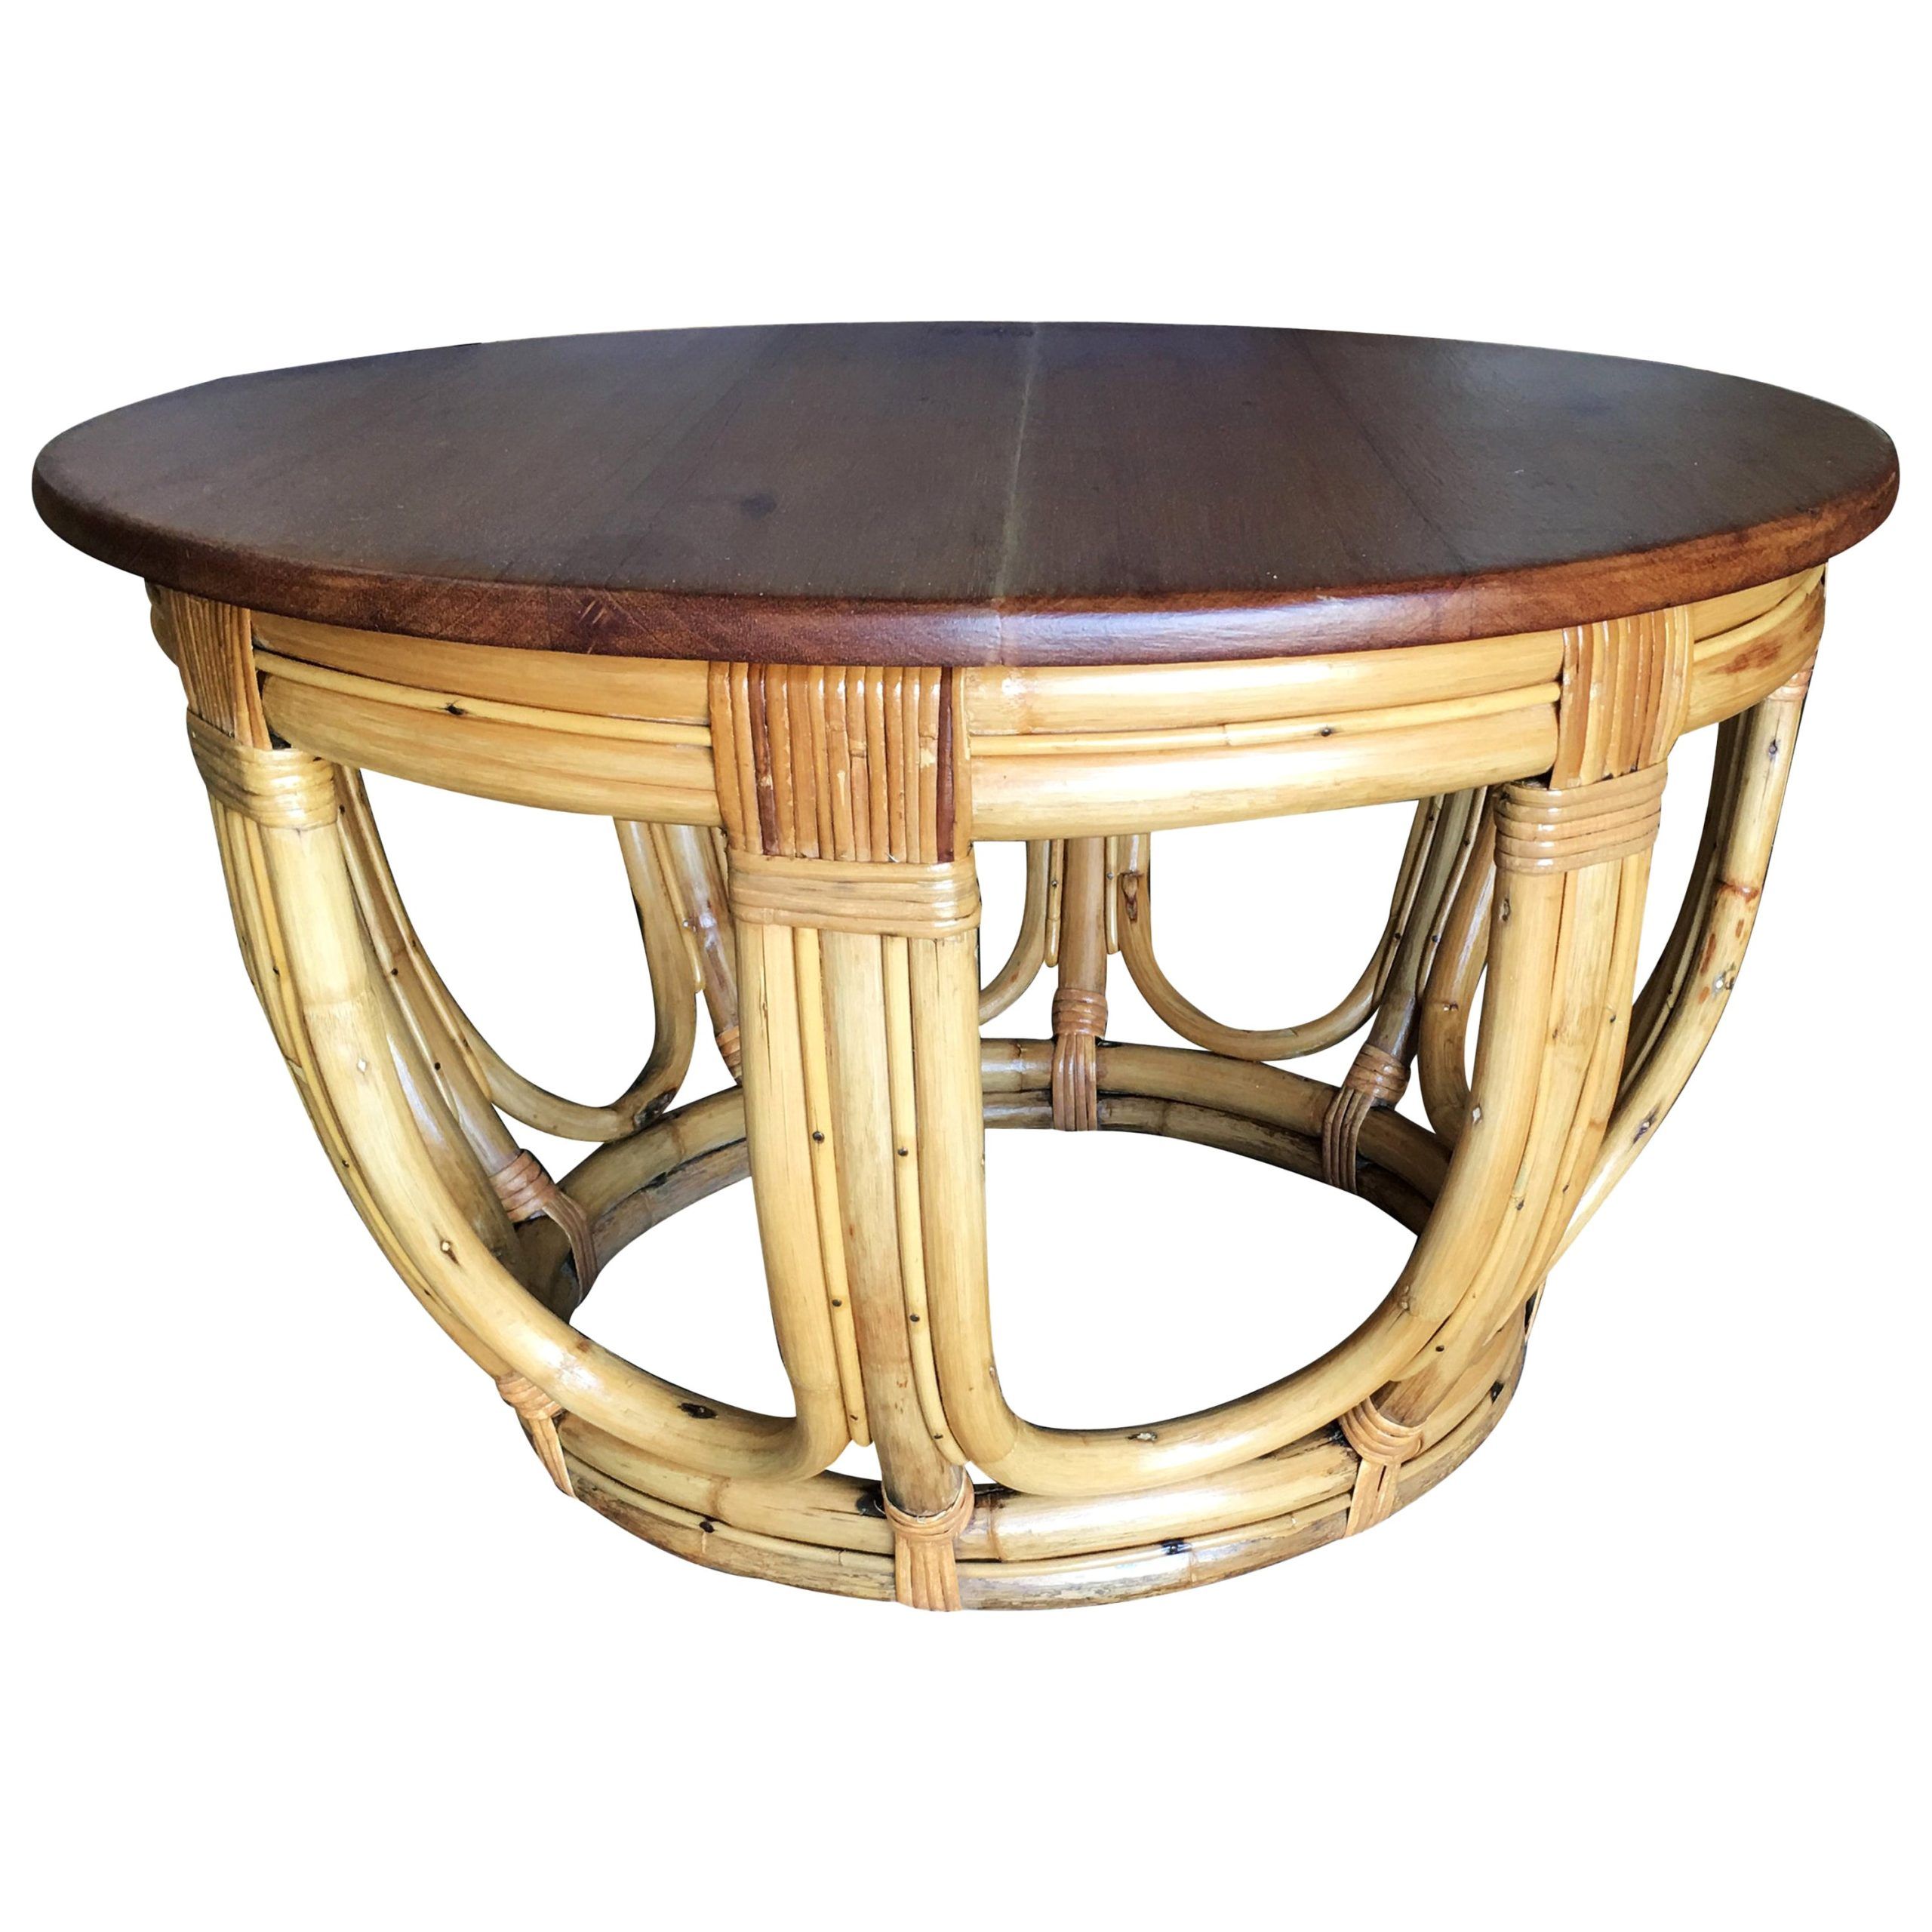 Restored Round Rattan Coffee Table With Mahogany Top For Sale At 1stdibs With Regard To Most Up To Date Rattan Coffee Tables (View 14 of 15)